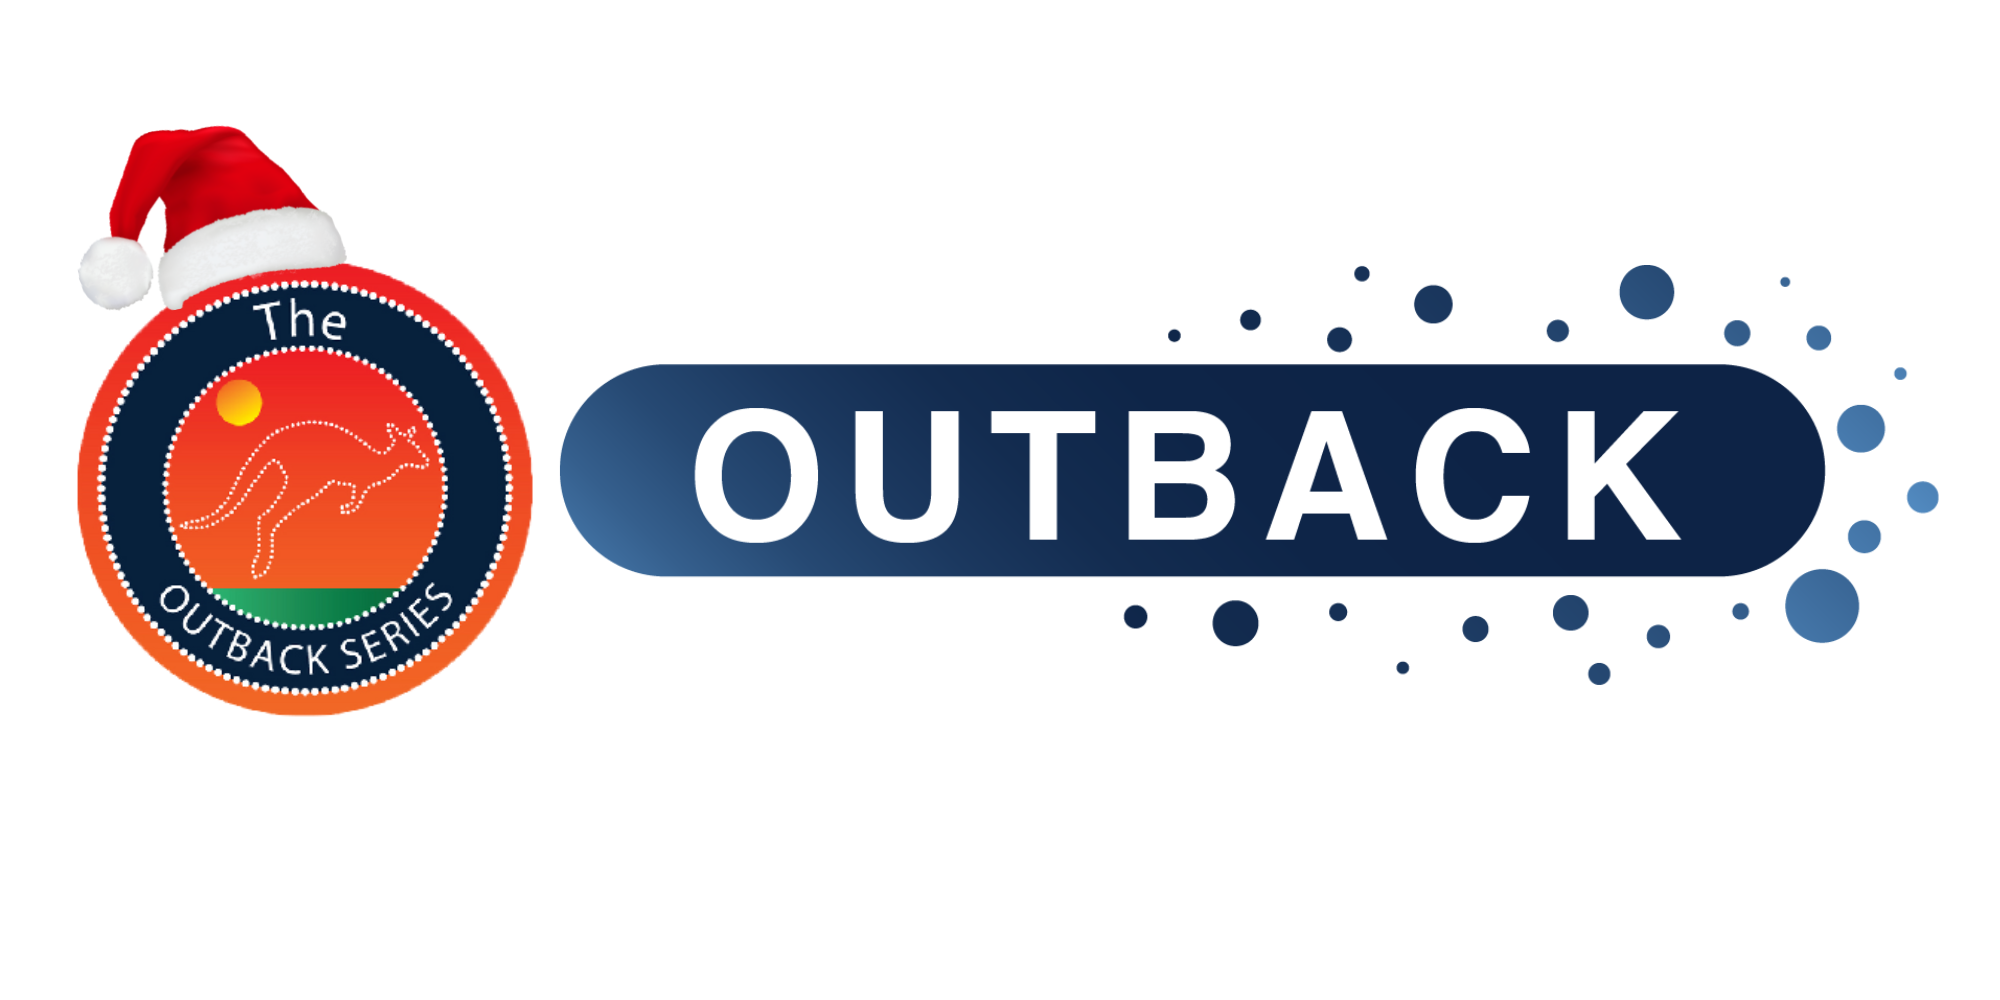 Outback Pain Reliefâ„¢